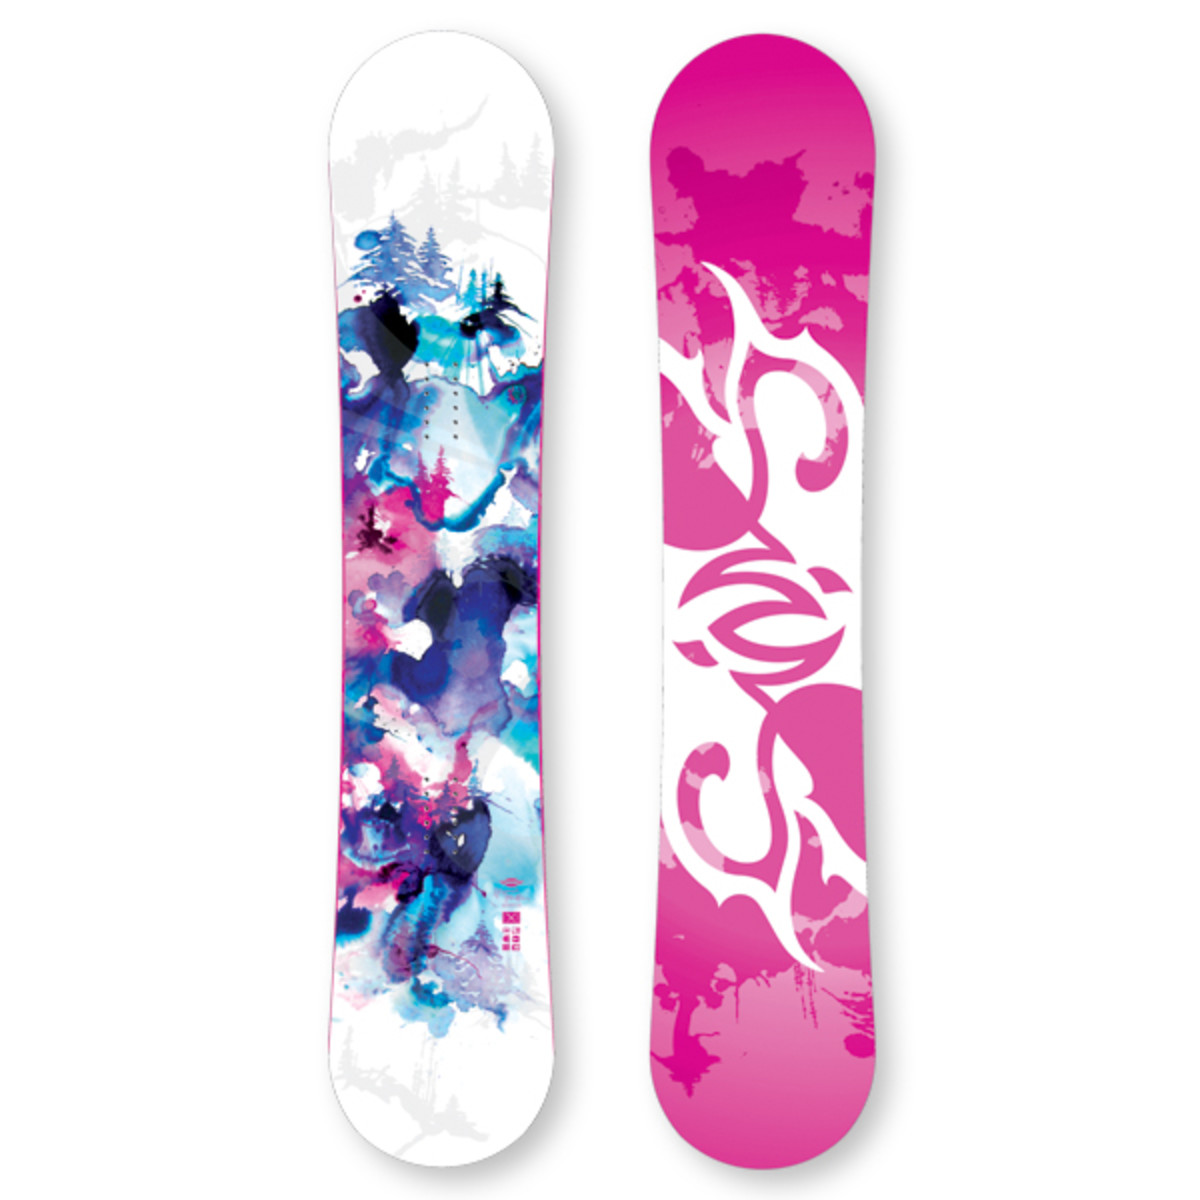 Sims Heiress Woman's Snowboard - Snowboarder